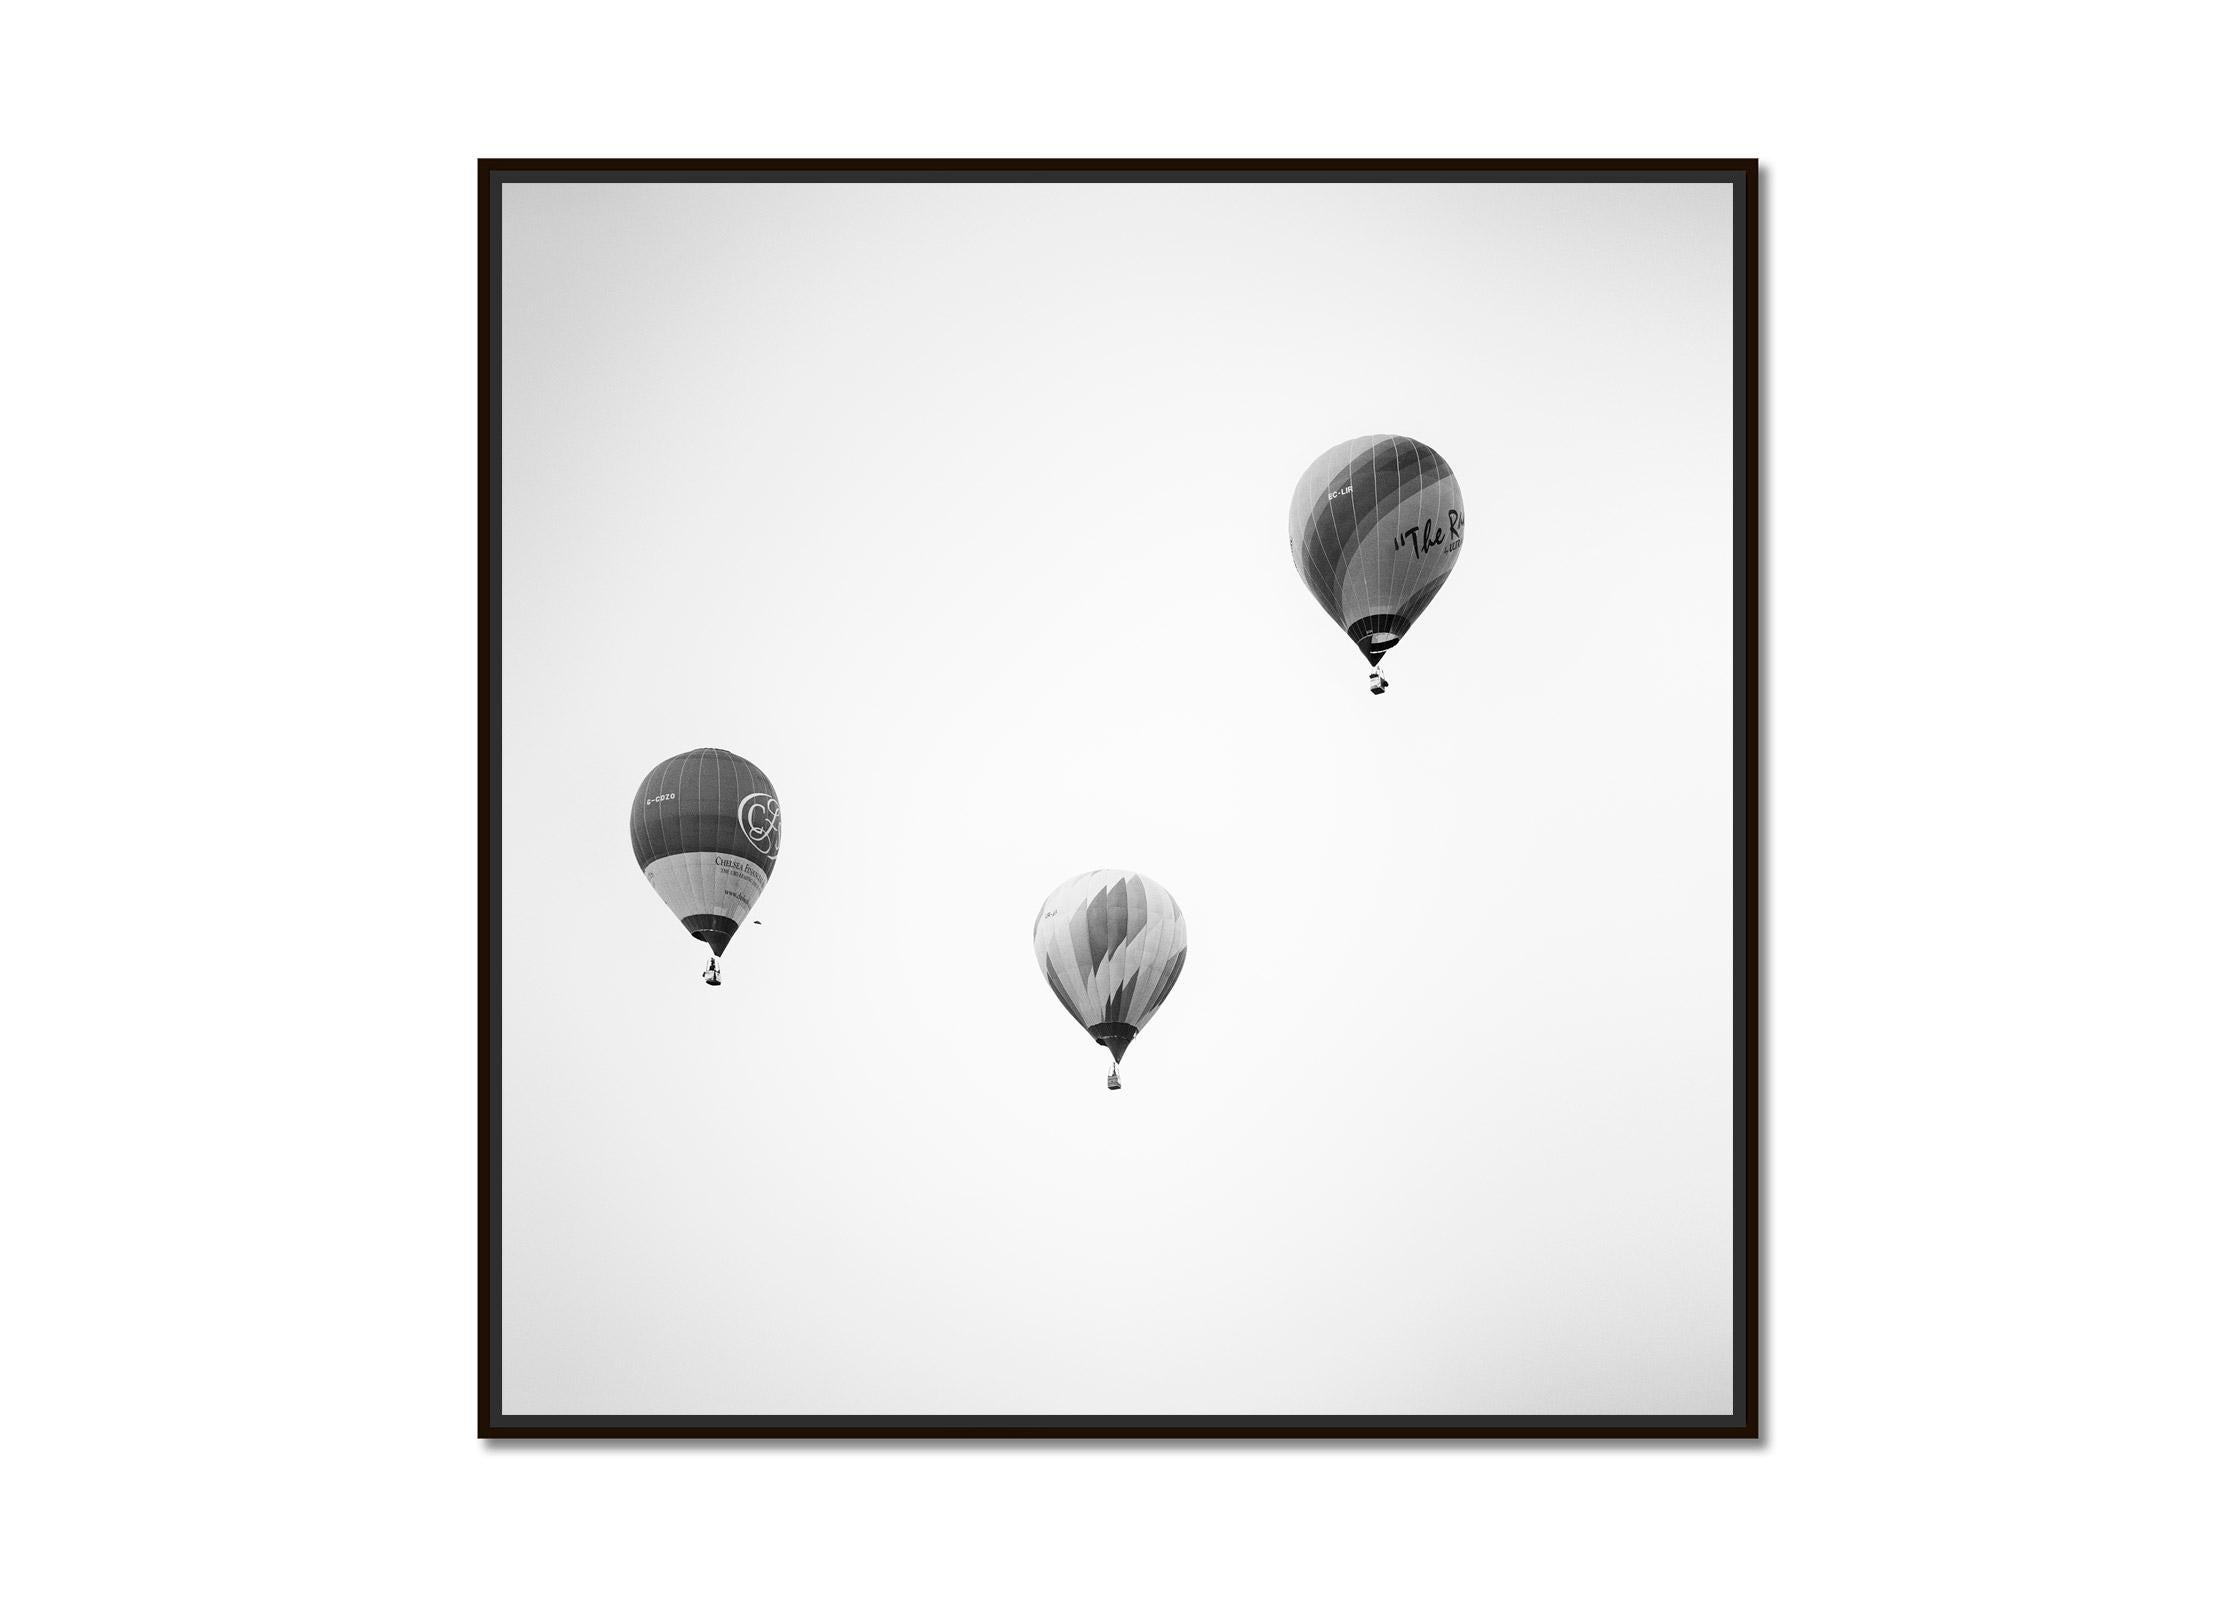 Hot Air Balloon, Championship, minimalist black and white photography, landscape - Photograph by Gerald Berghammer